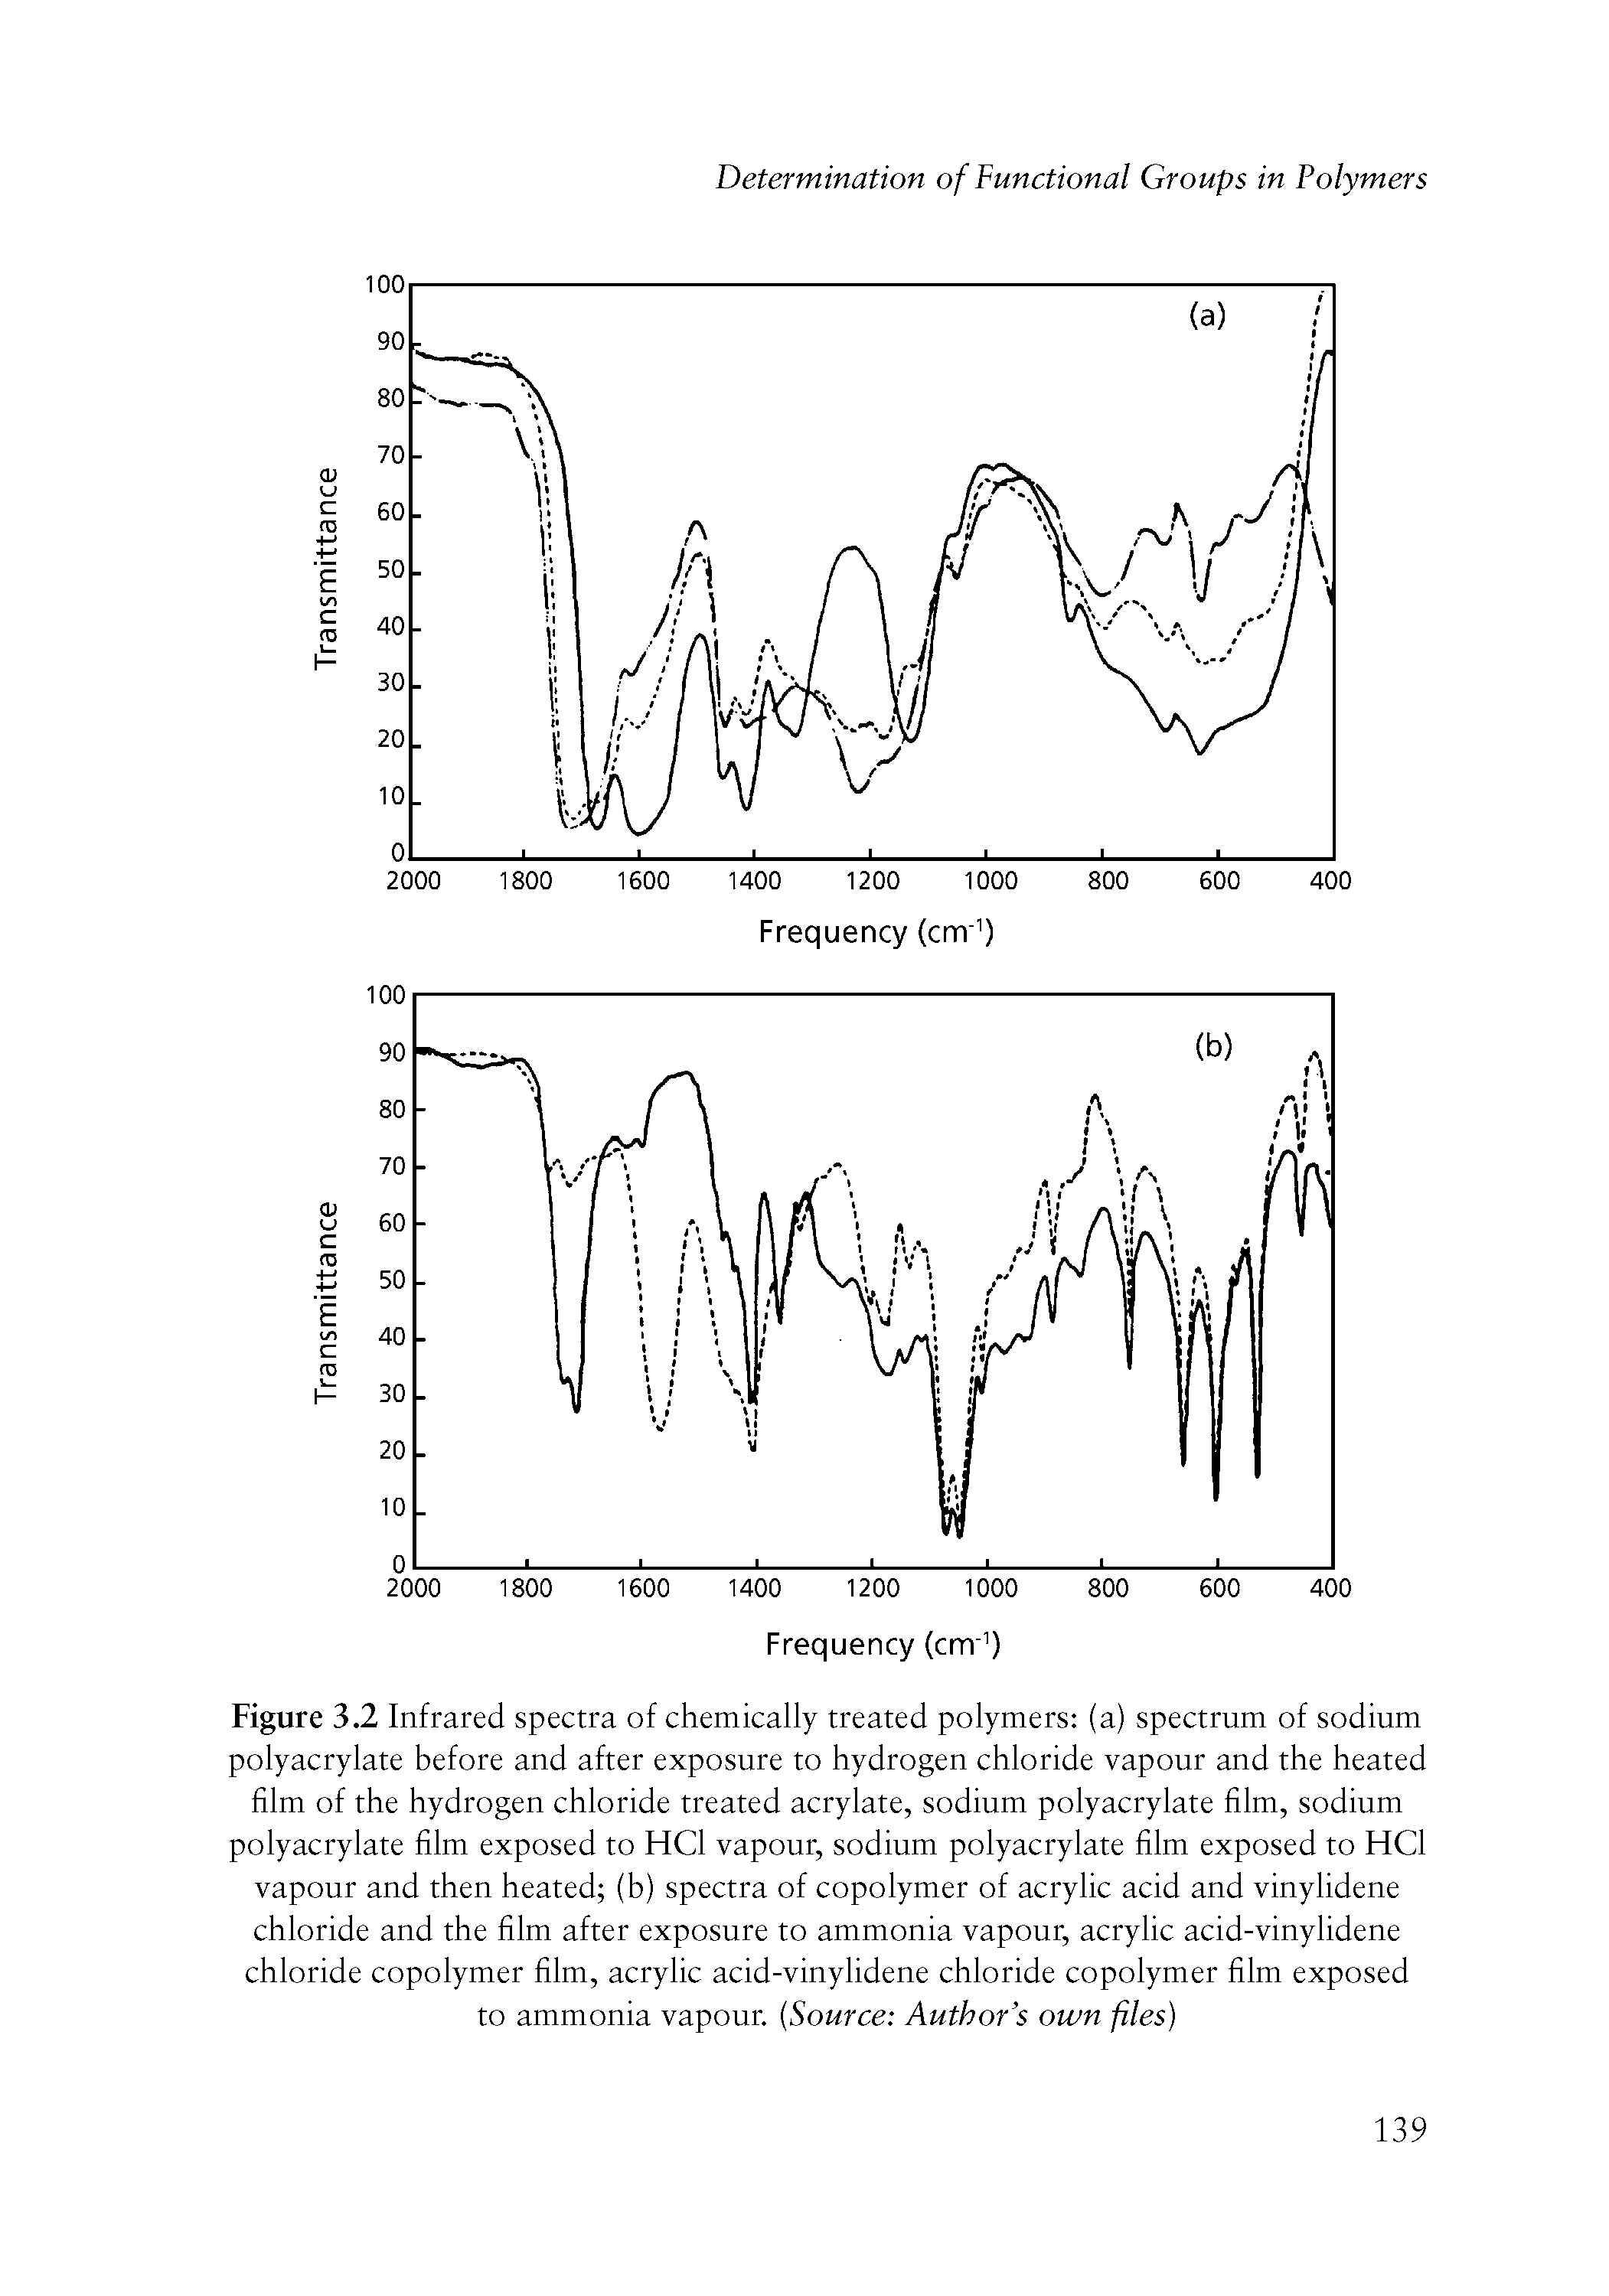 Figure 3.2 Infrared spectra of chemically treated polymers (a) spectrum of sodium polyacrylate before and after exposure to hydrogen chloride vapour and the heated film of the hydrogen chloride treated acrylate, sodium polyacrylate film, sodium polyacrylate film exposed to HCl vapour, sodium polyacrylate film exposed to HCl vapour and then heated (b) spectra of copolymer of acrylic acid and vinylidene chloride and the film after exposure to ammonia vapour, acrylic acid-vinylidene chloride copolymer film, acrylic acid-vinylidene chloride copolymer film exposed to ammonia vapour. Source Author s own files)...